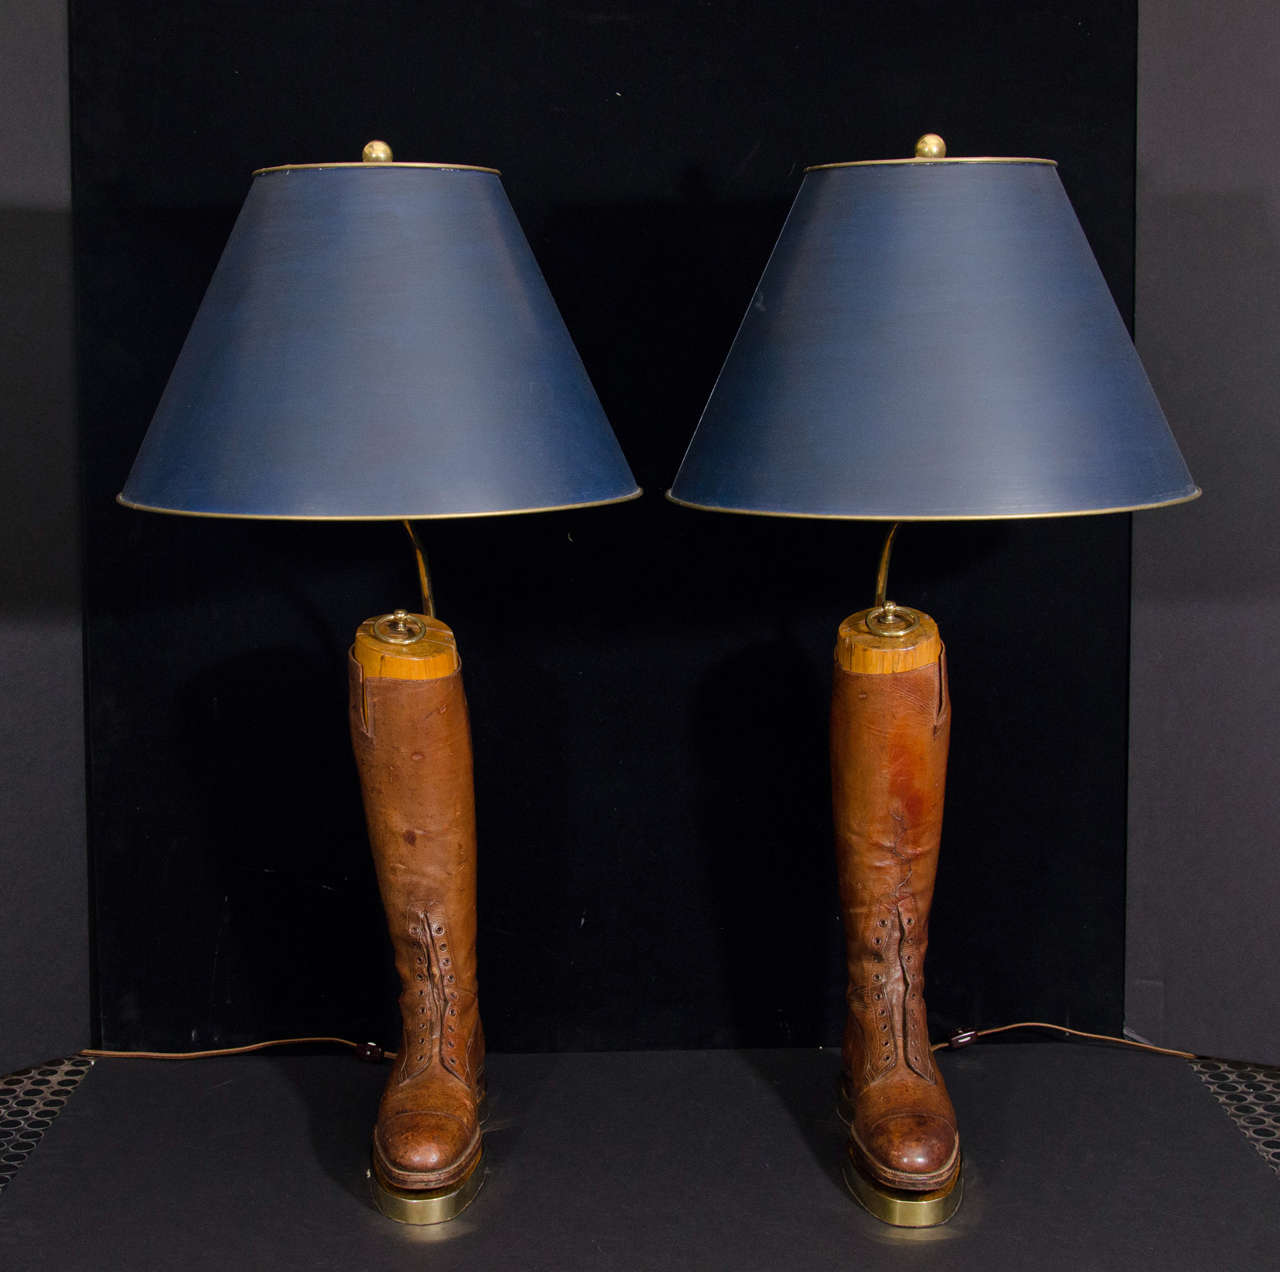 Pair of Bespoke Leather Riding Boots With Original Wooden Forms Mounted on Brass Platforms.